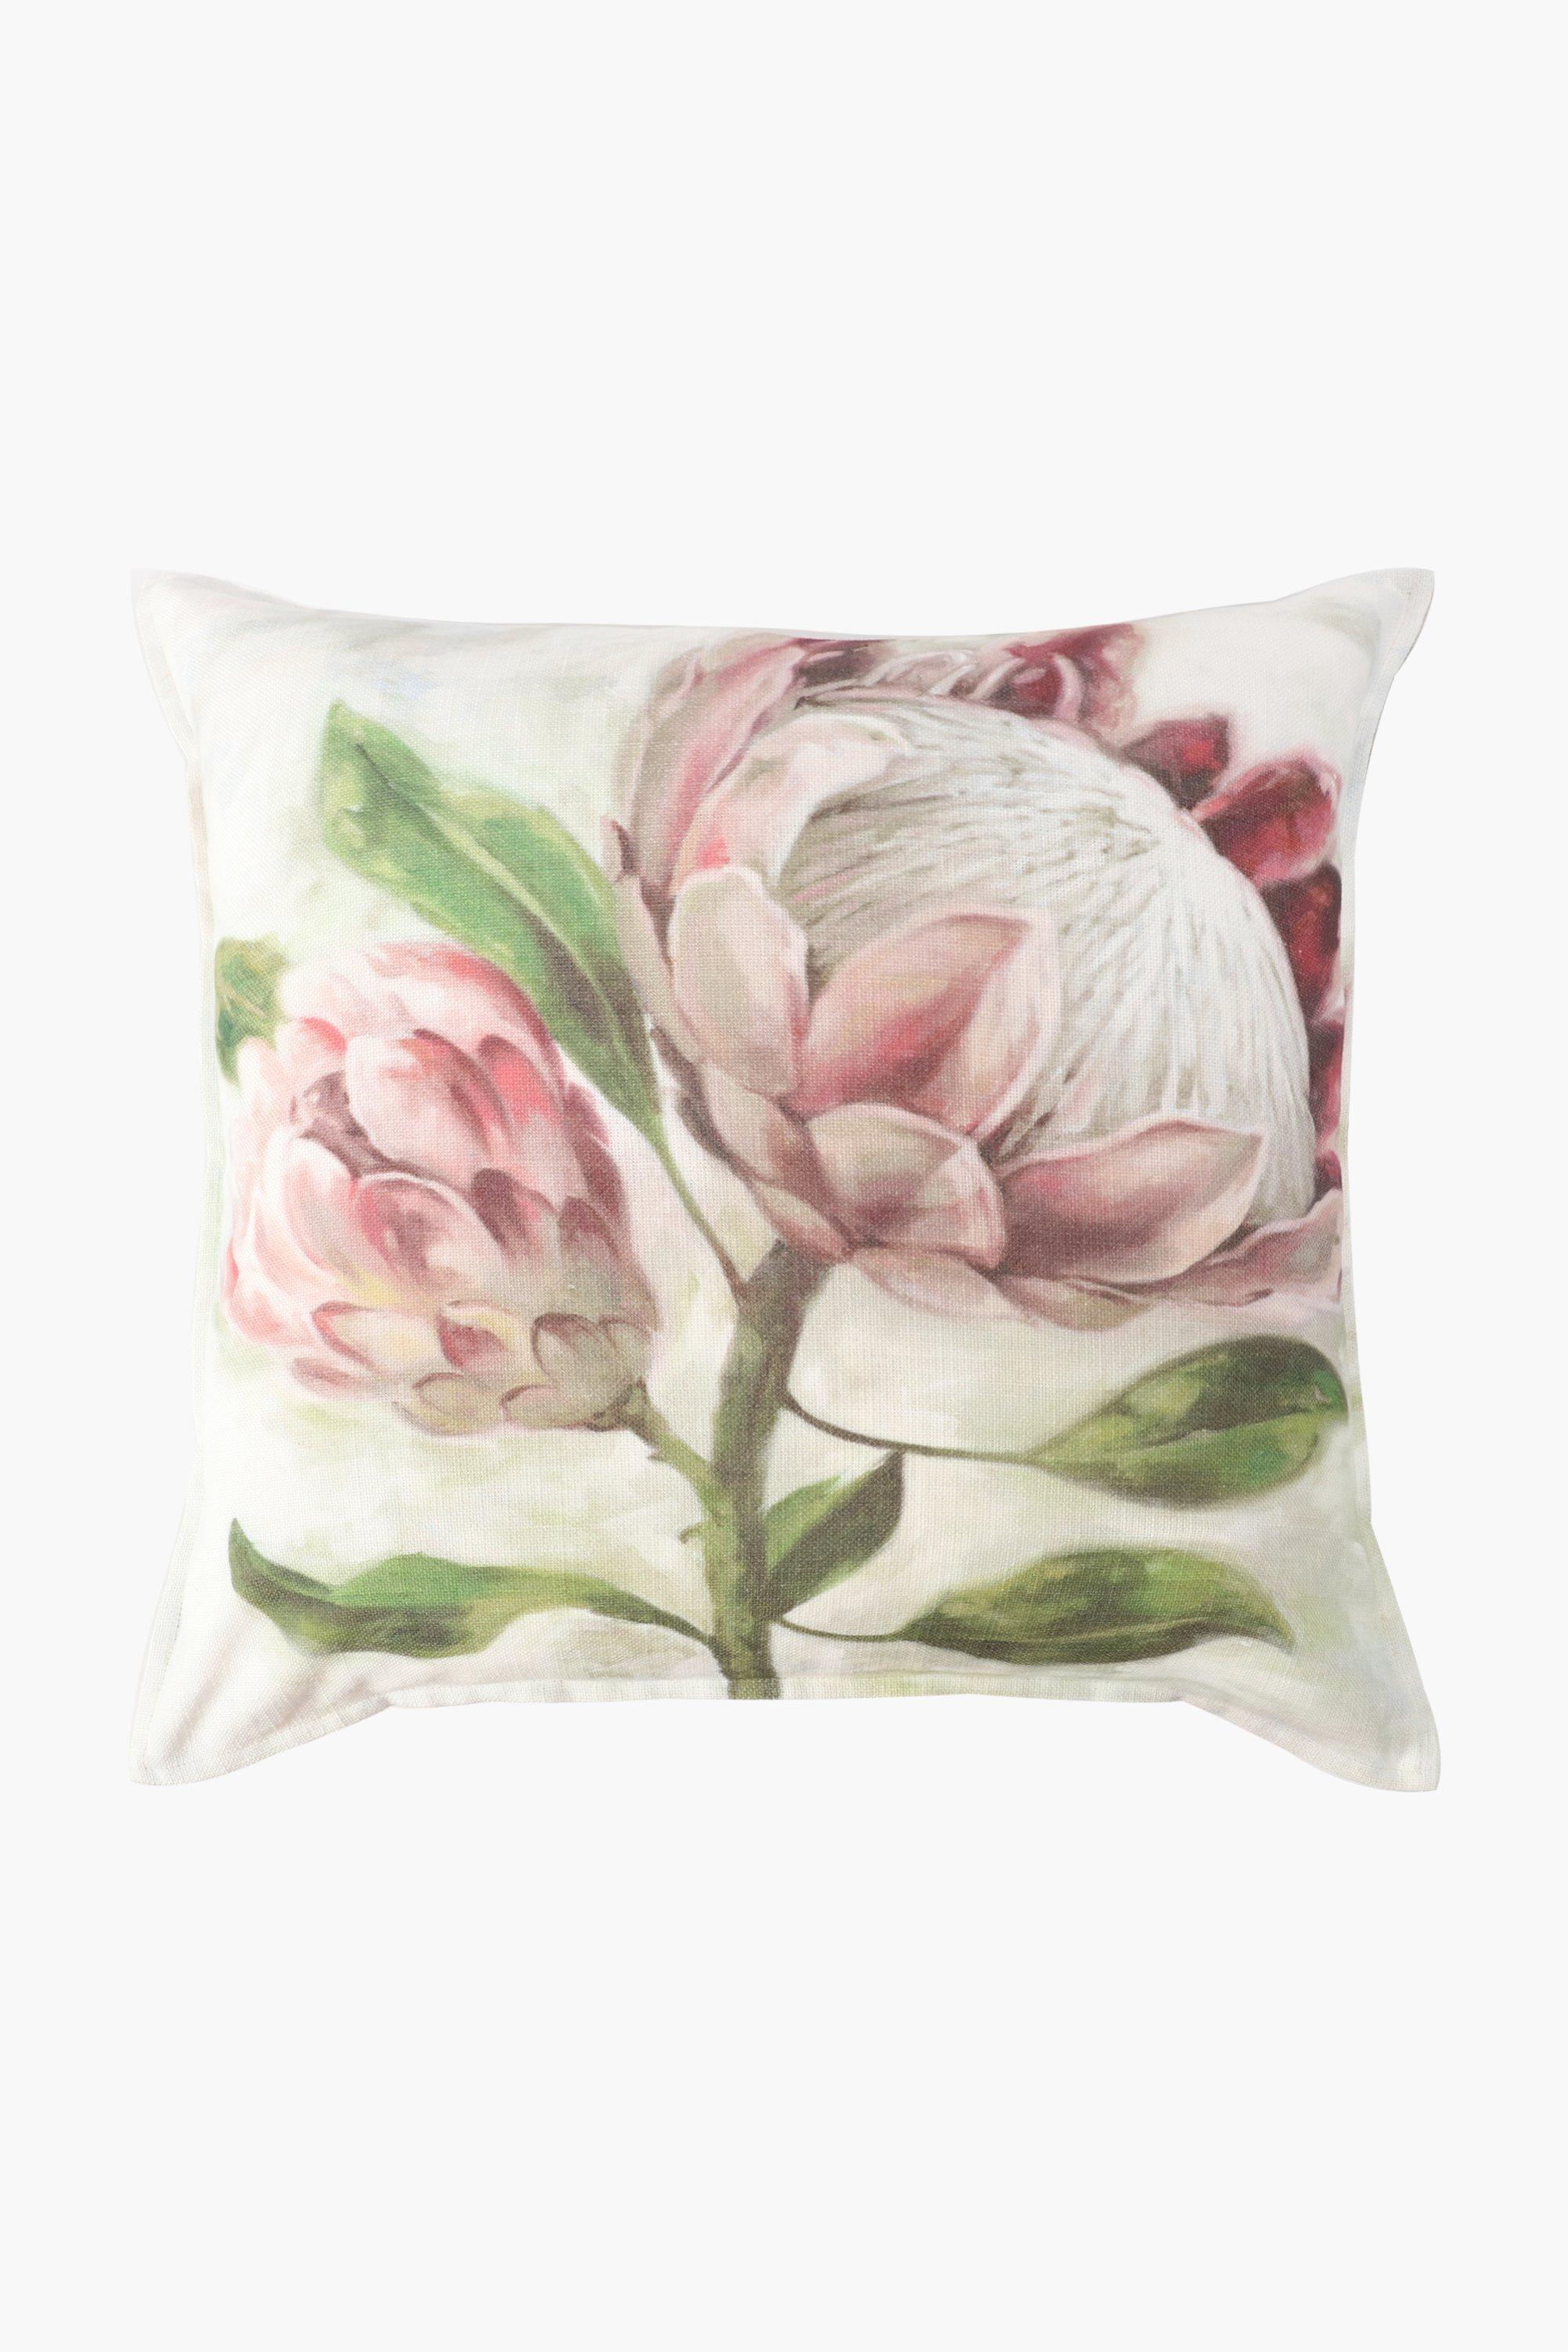 Printed Loxton Protea Feather Scatter Cushion, 60x60cm